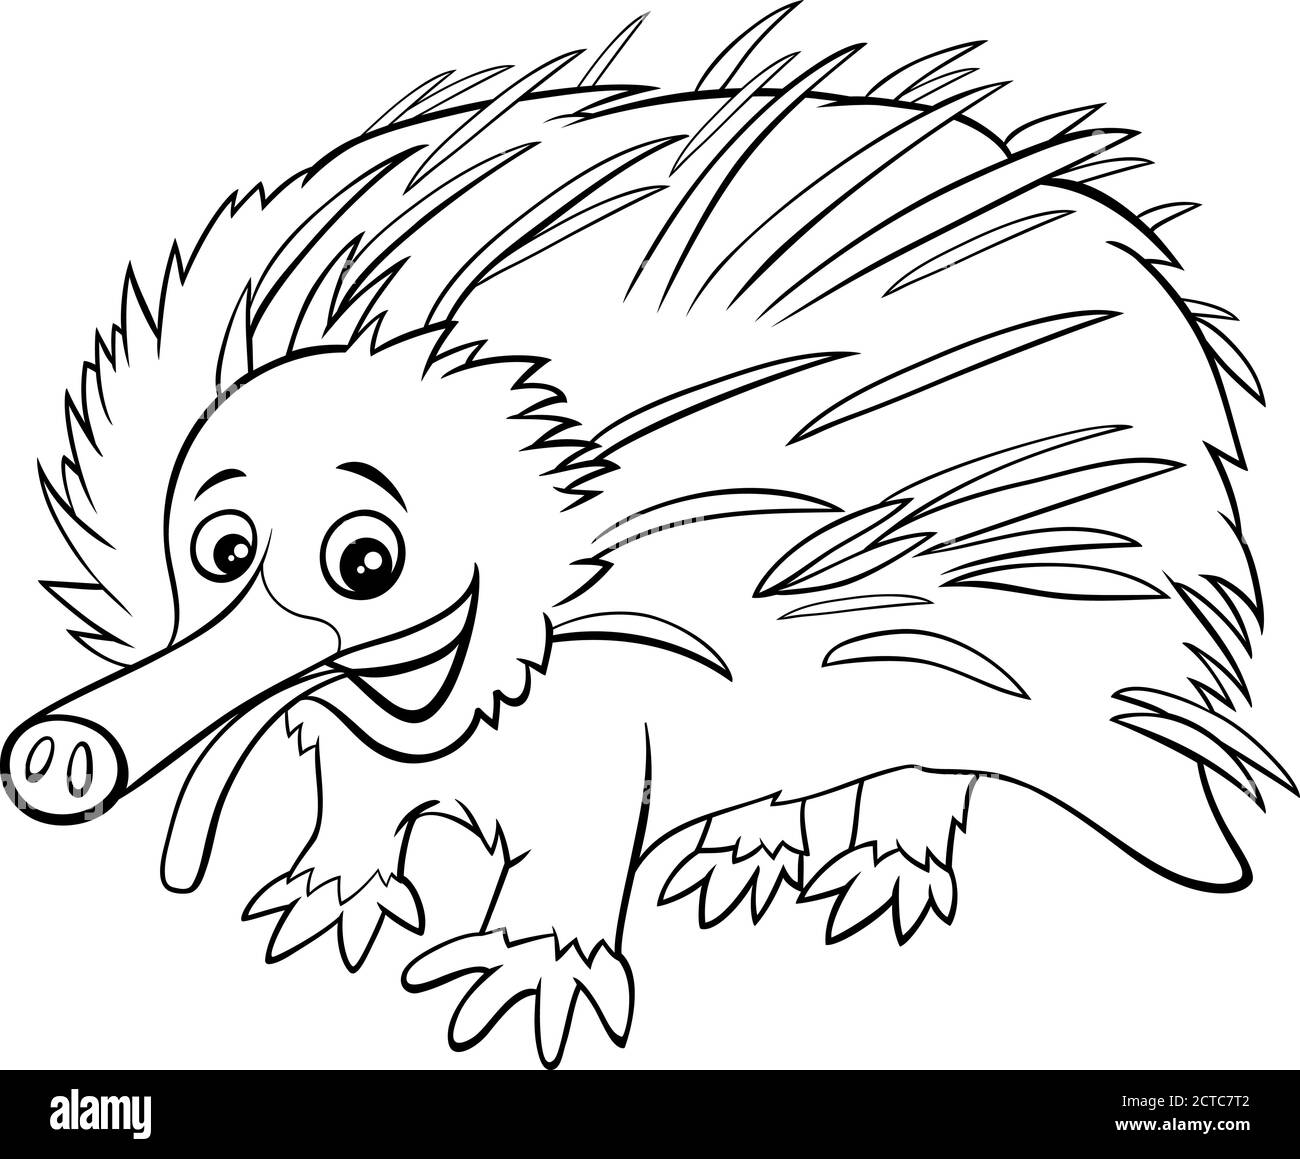 Black and White Cartoon Illustration of Echidna Wild Animal Character Coloring Book Page Stock Vector